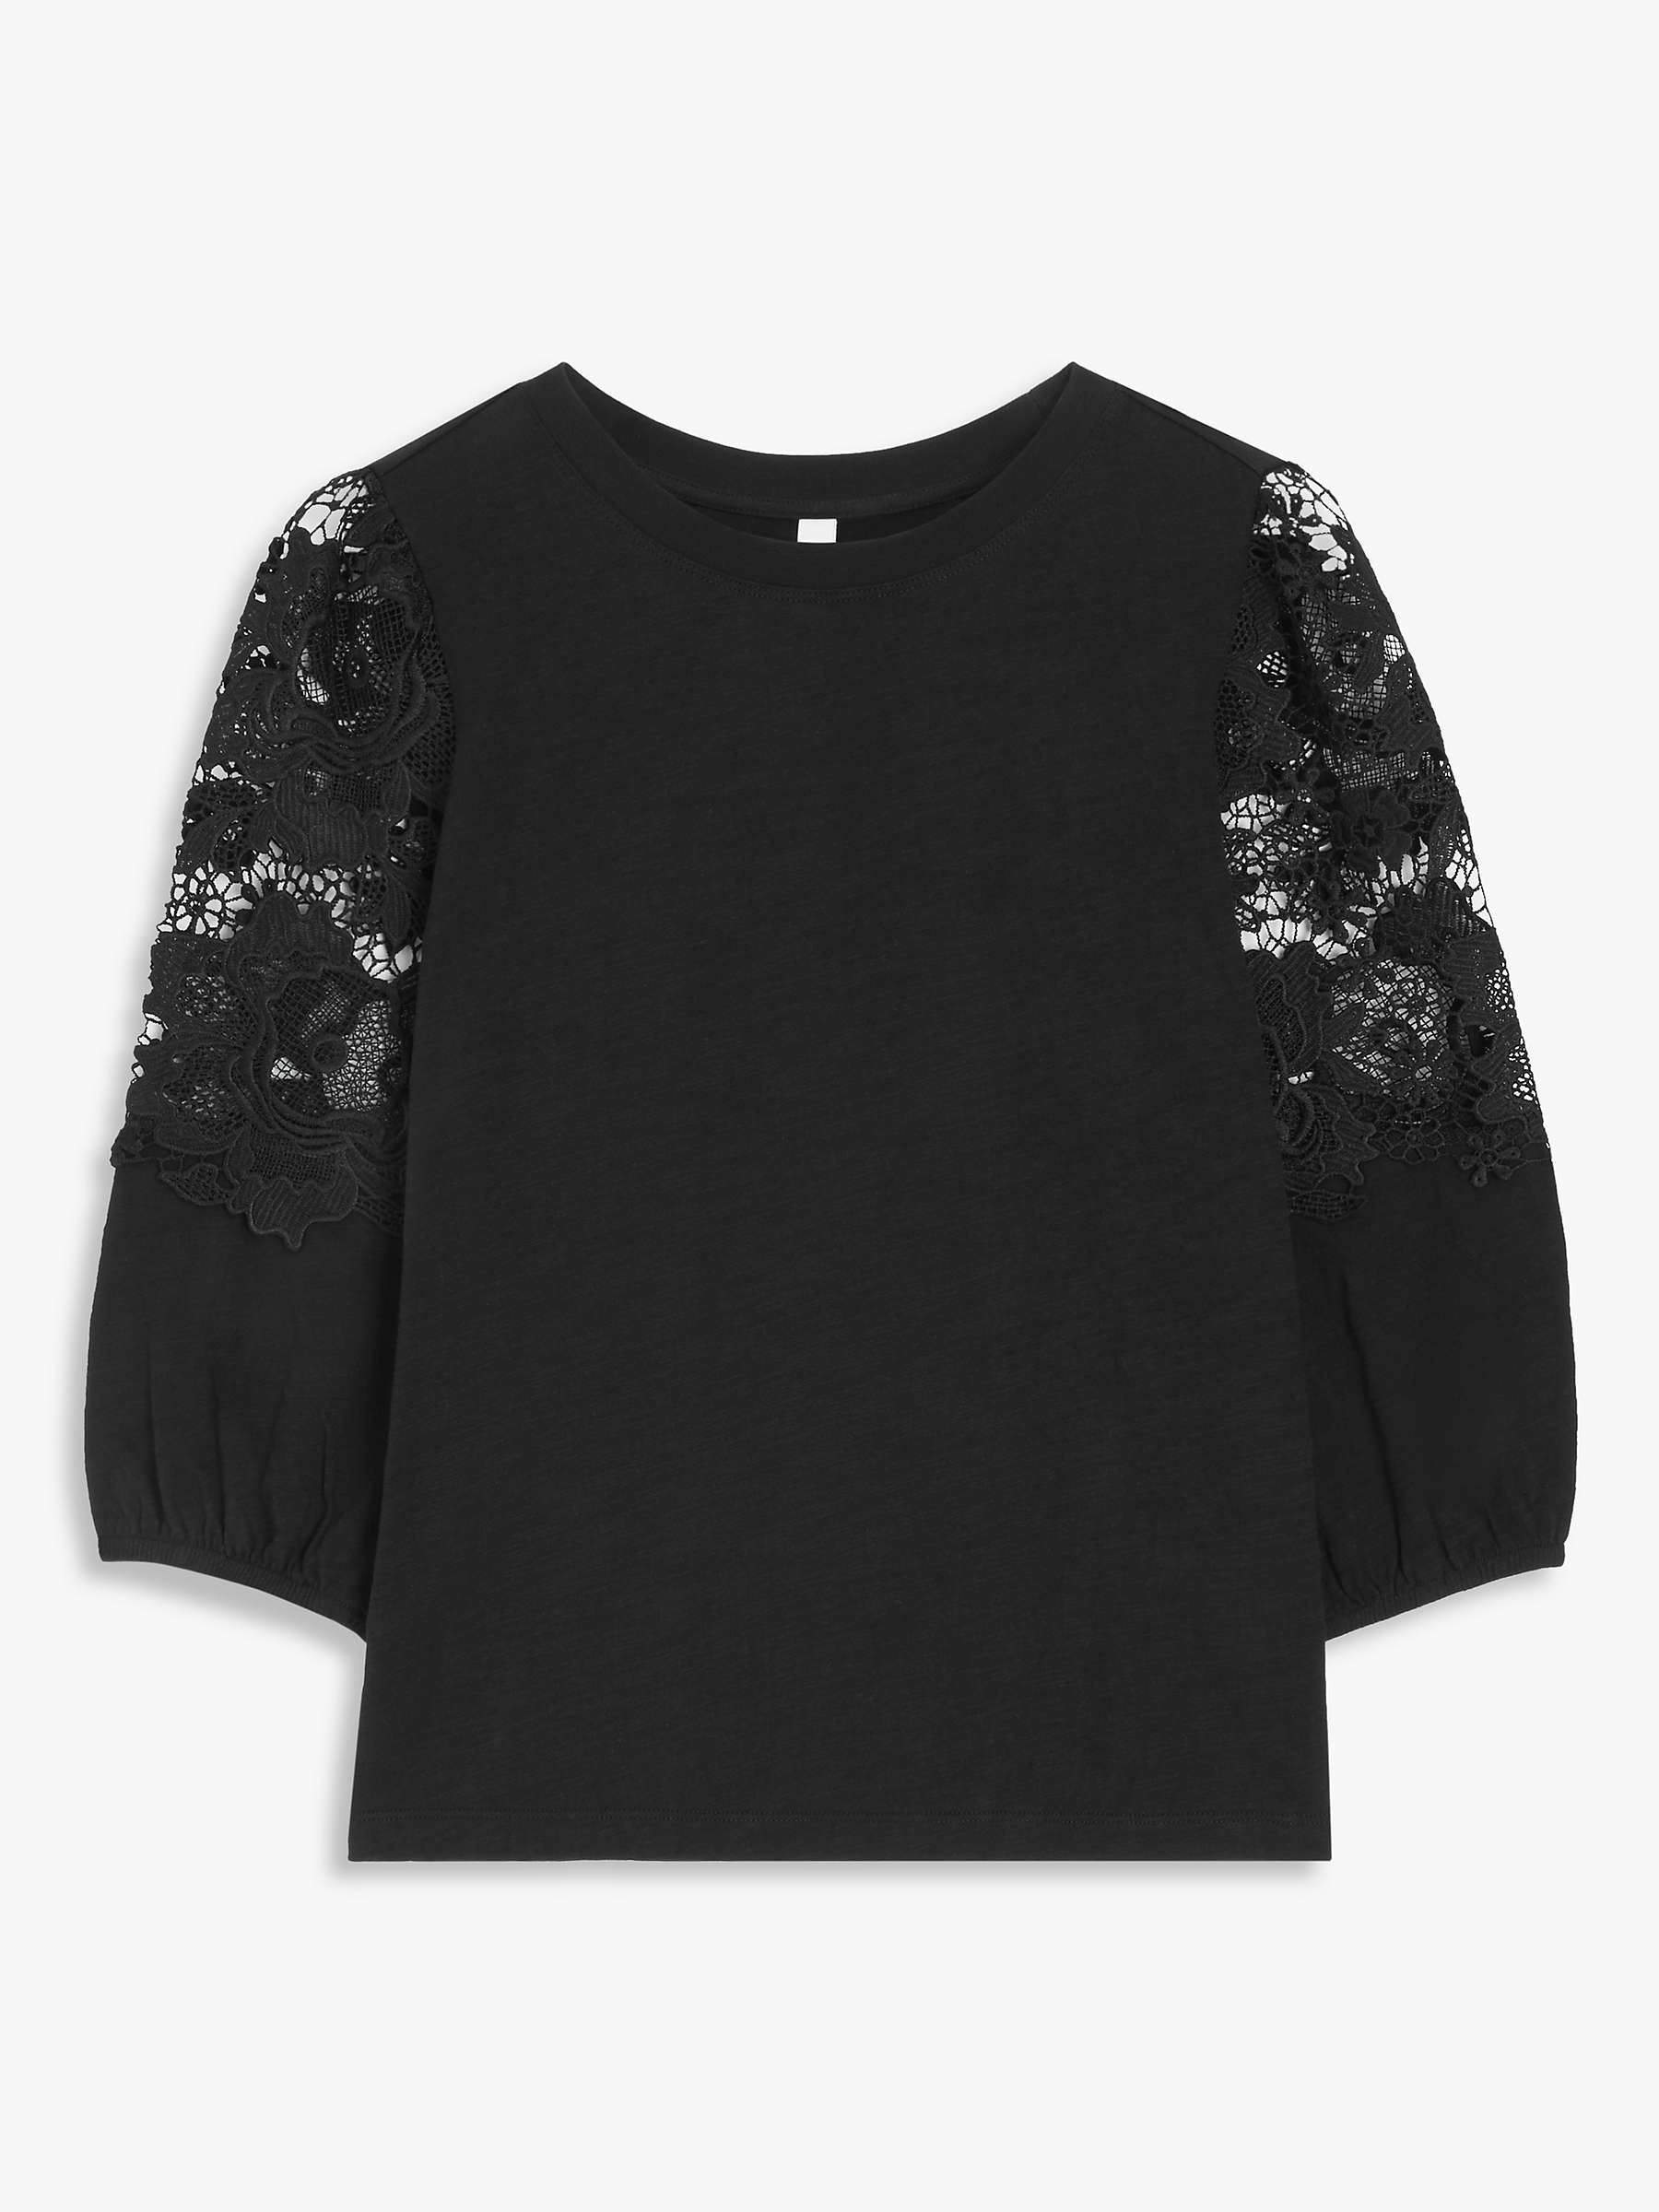 AND/OR Letty Lace Sleeve Top, Black at John Lewis & Partners